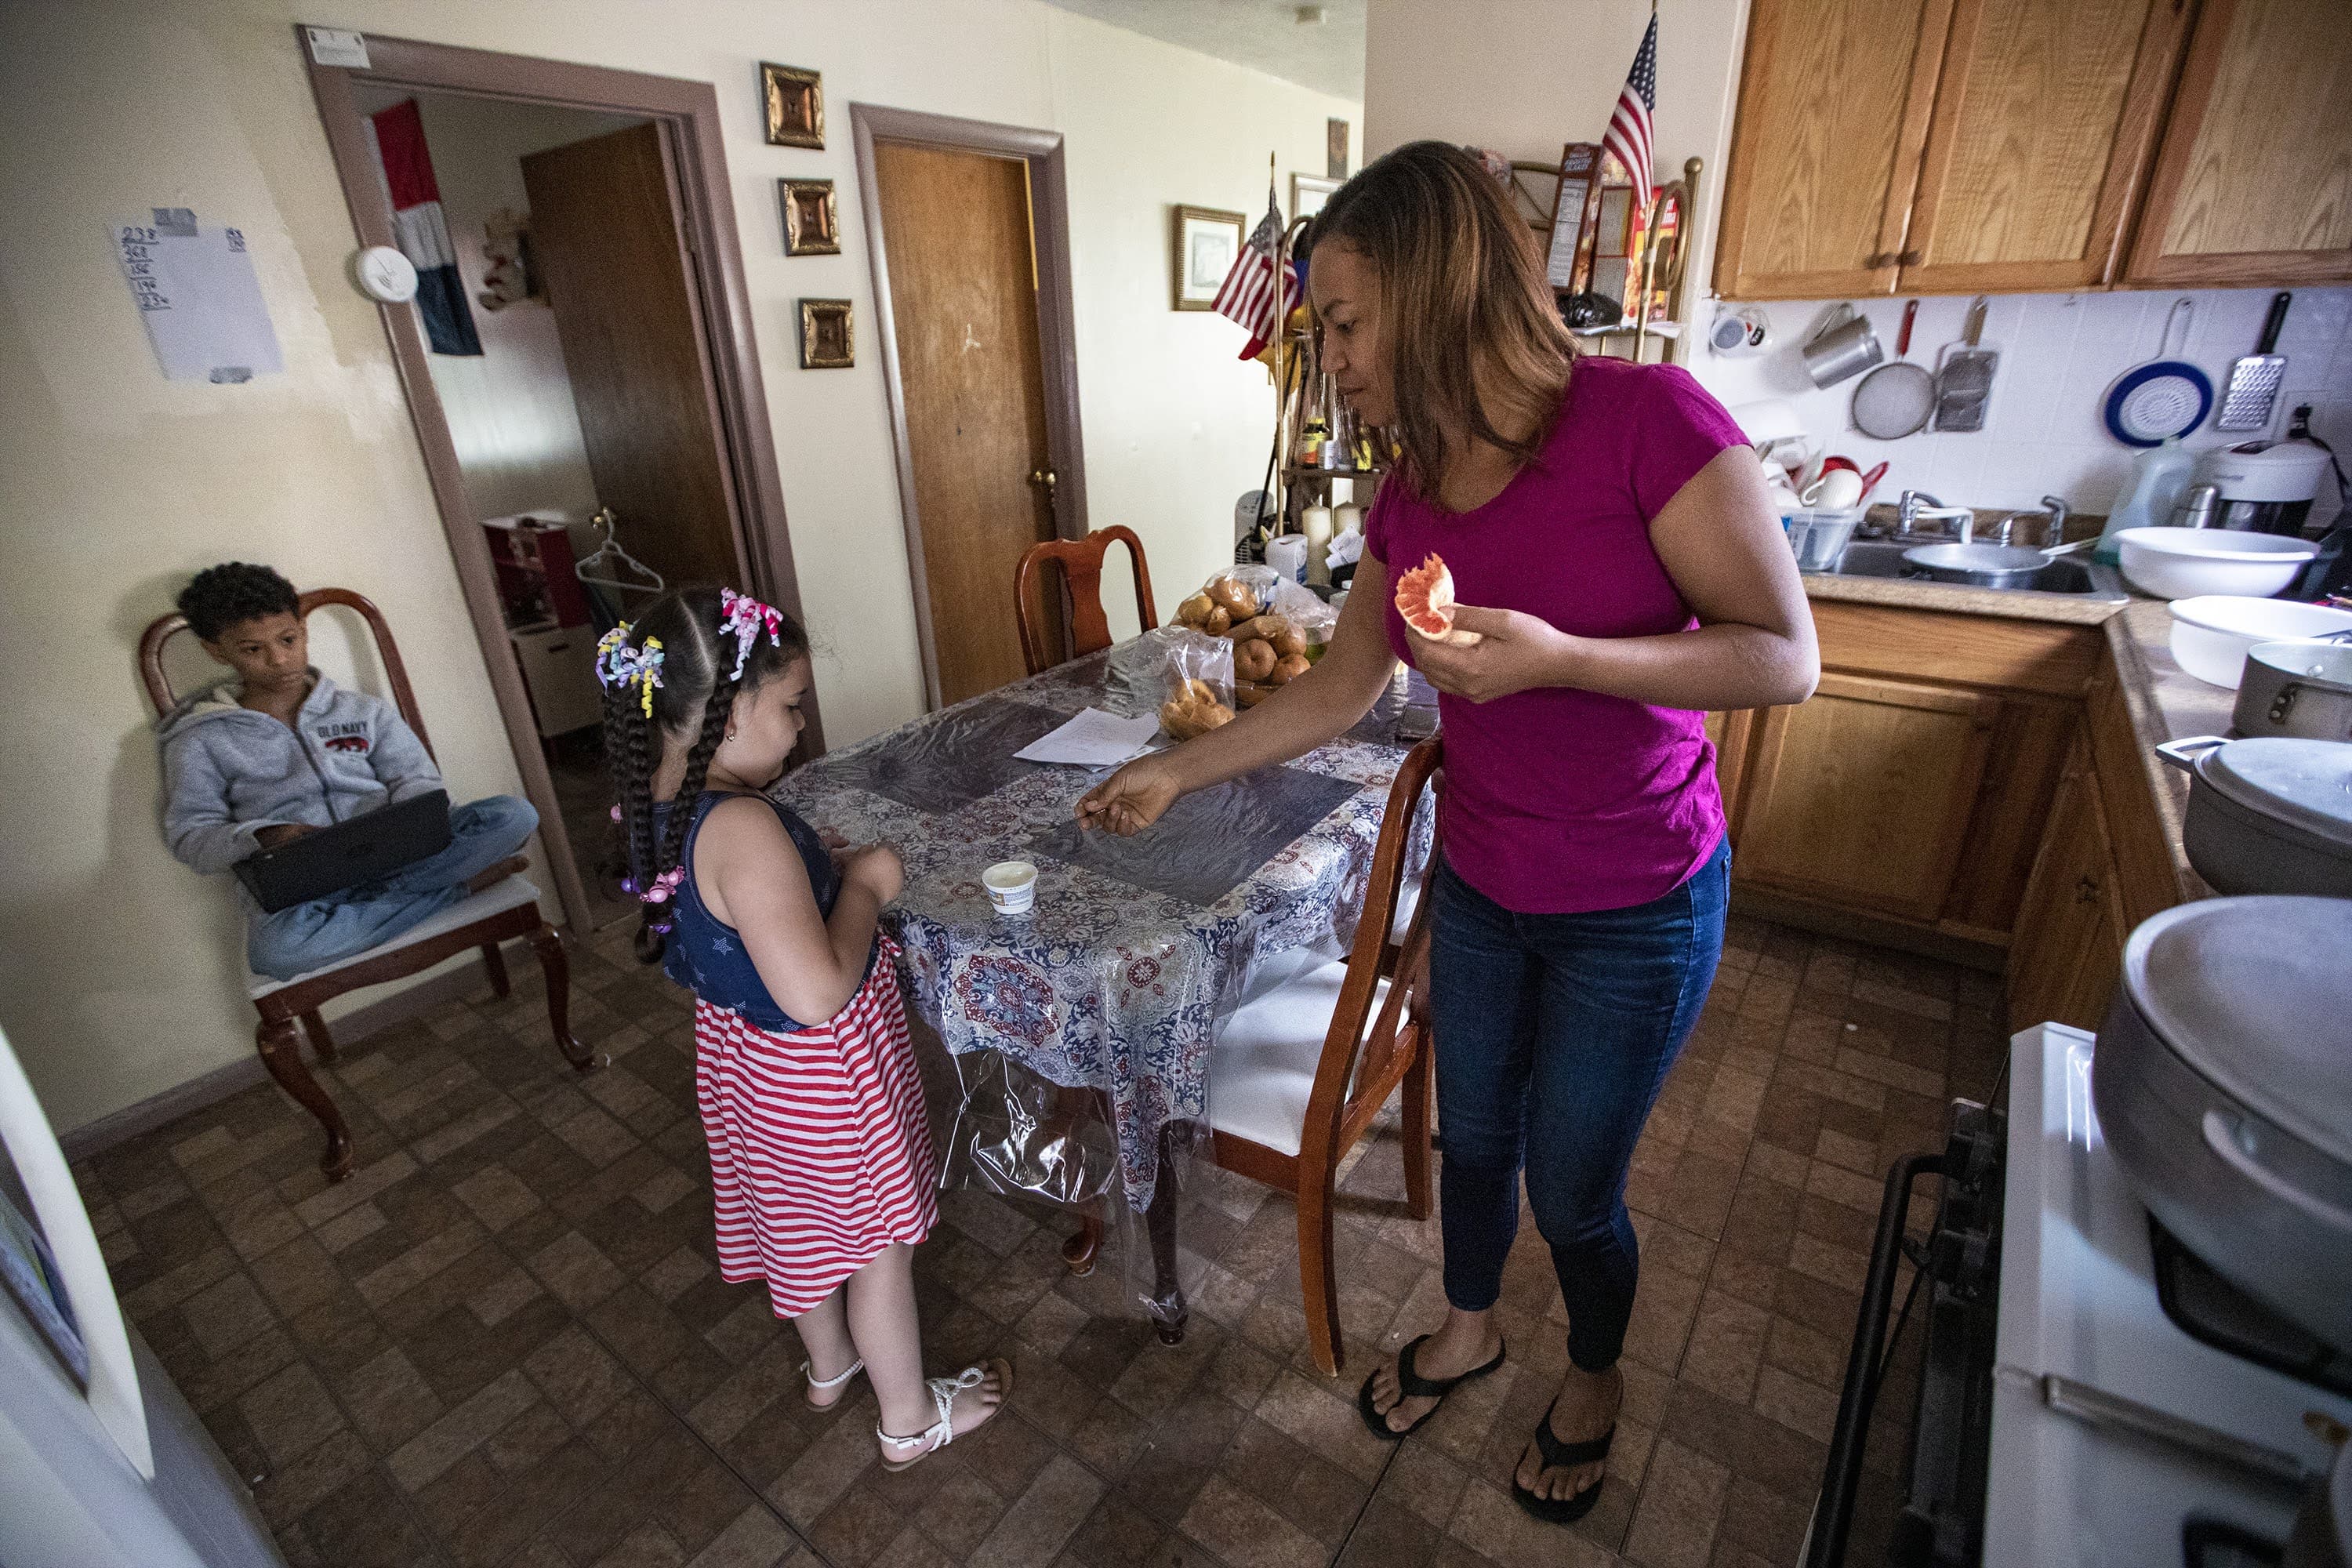 Margareth gives a spoon to Luz to eat her late morning yogurt snack, while Jesus sits on a chair using a laptop. (Jesse Costa/WBUR)